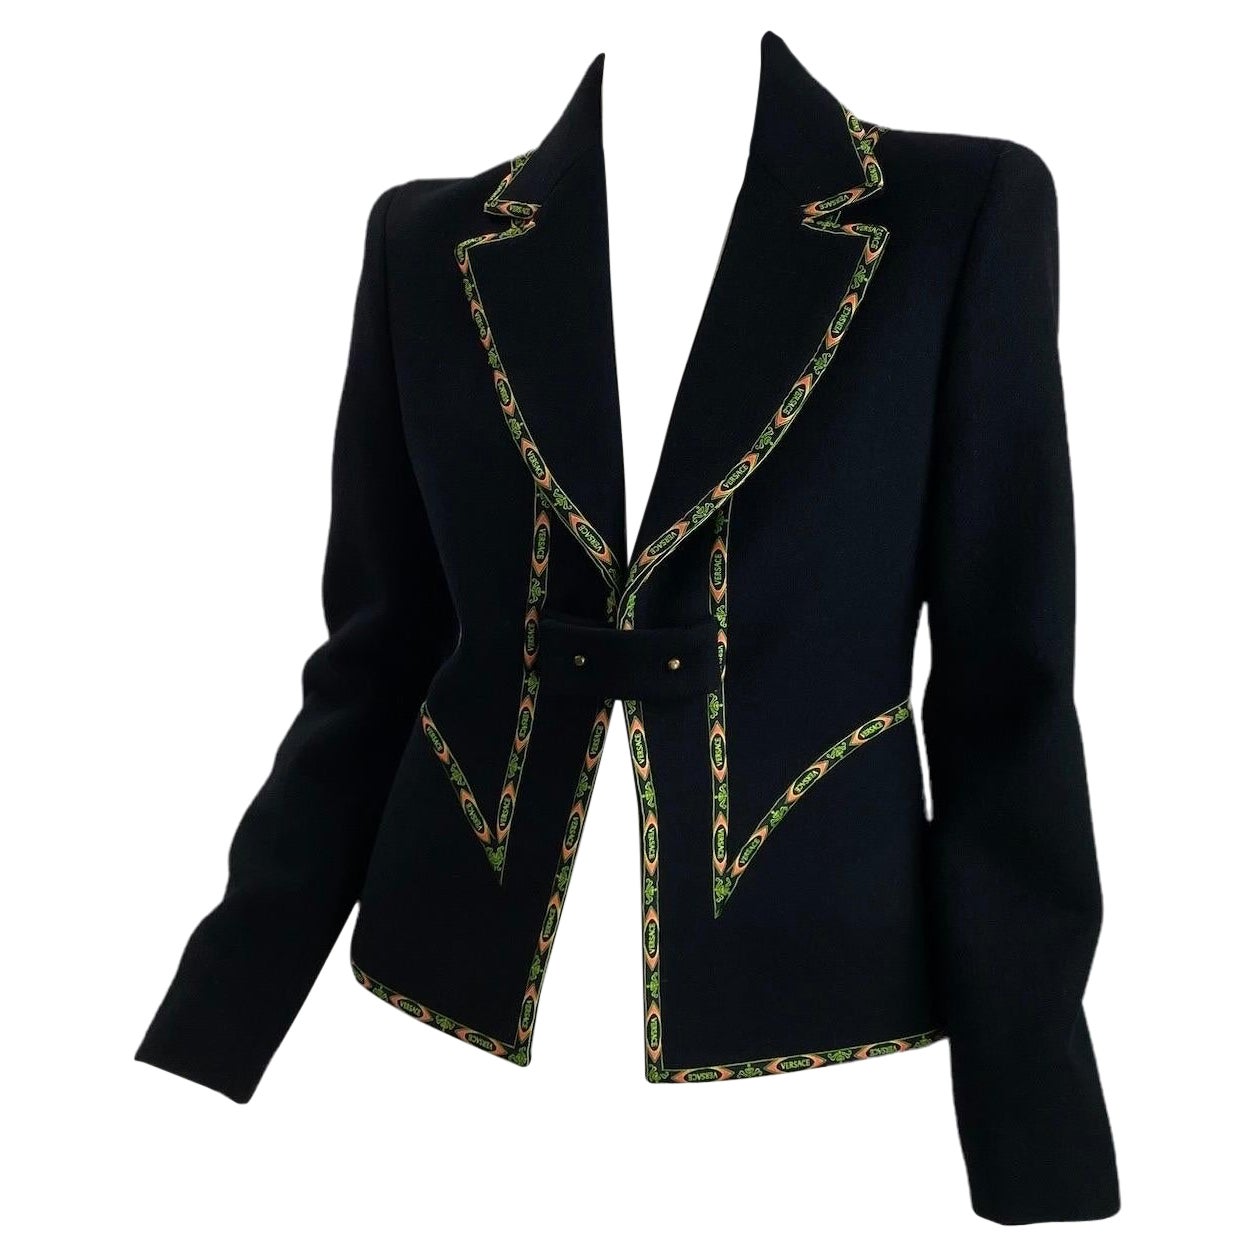 F/W 2002 Vintage Gianni Versace Couture Black Blazer 42 - 6 *New with tags* For Sale